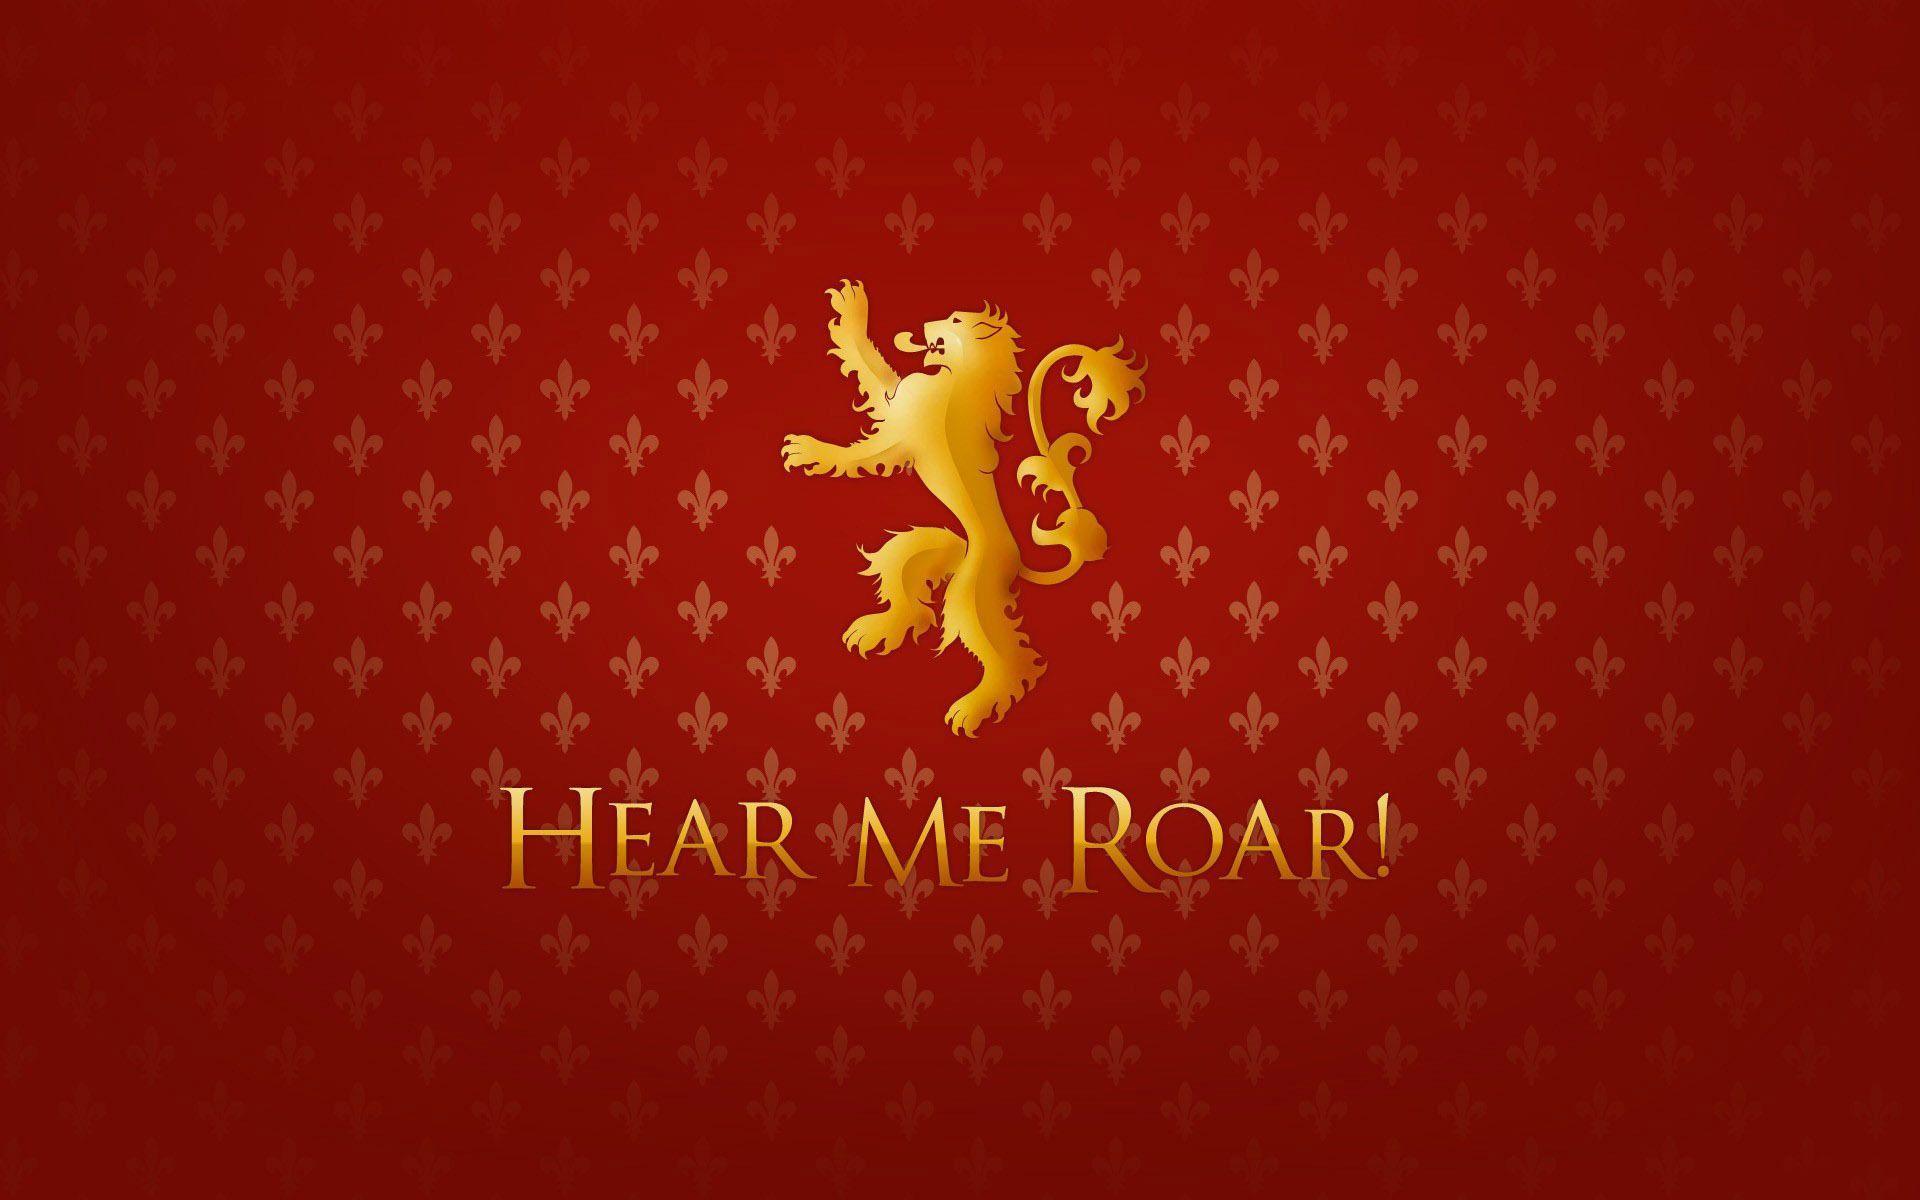 Game of Thrones house crests Wallpaper. Wide Wallpaper Collections